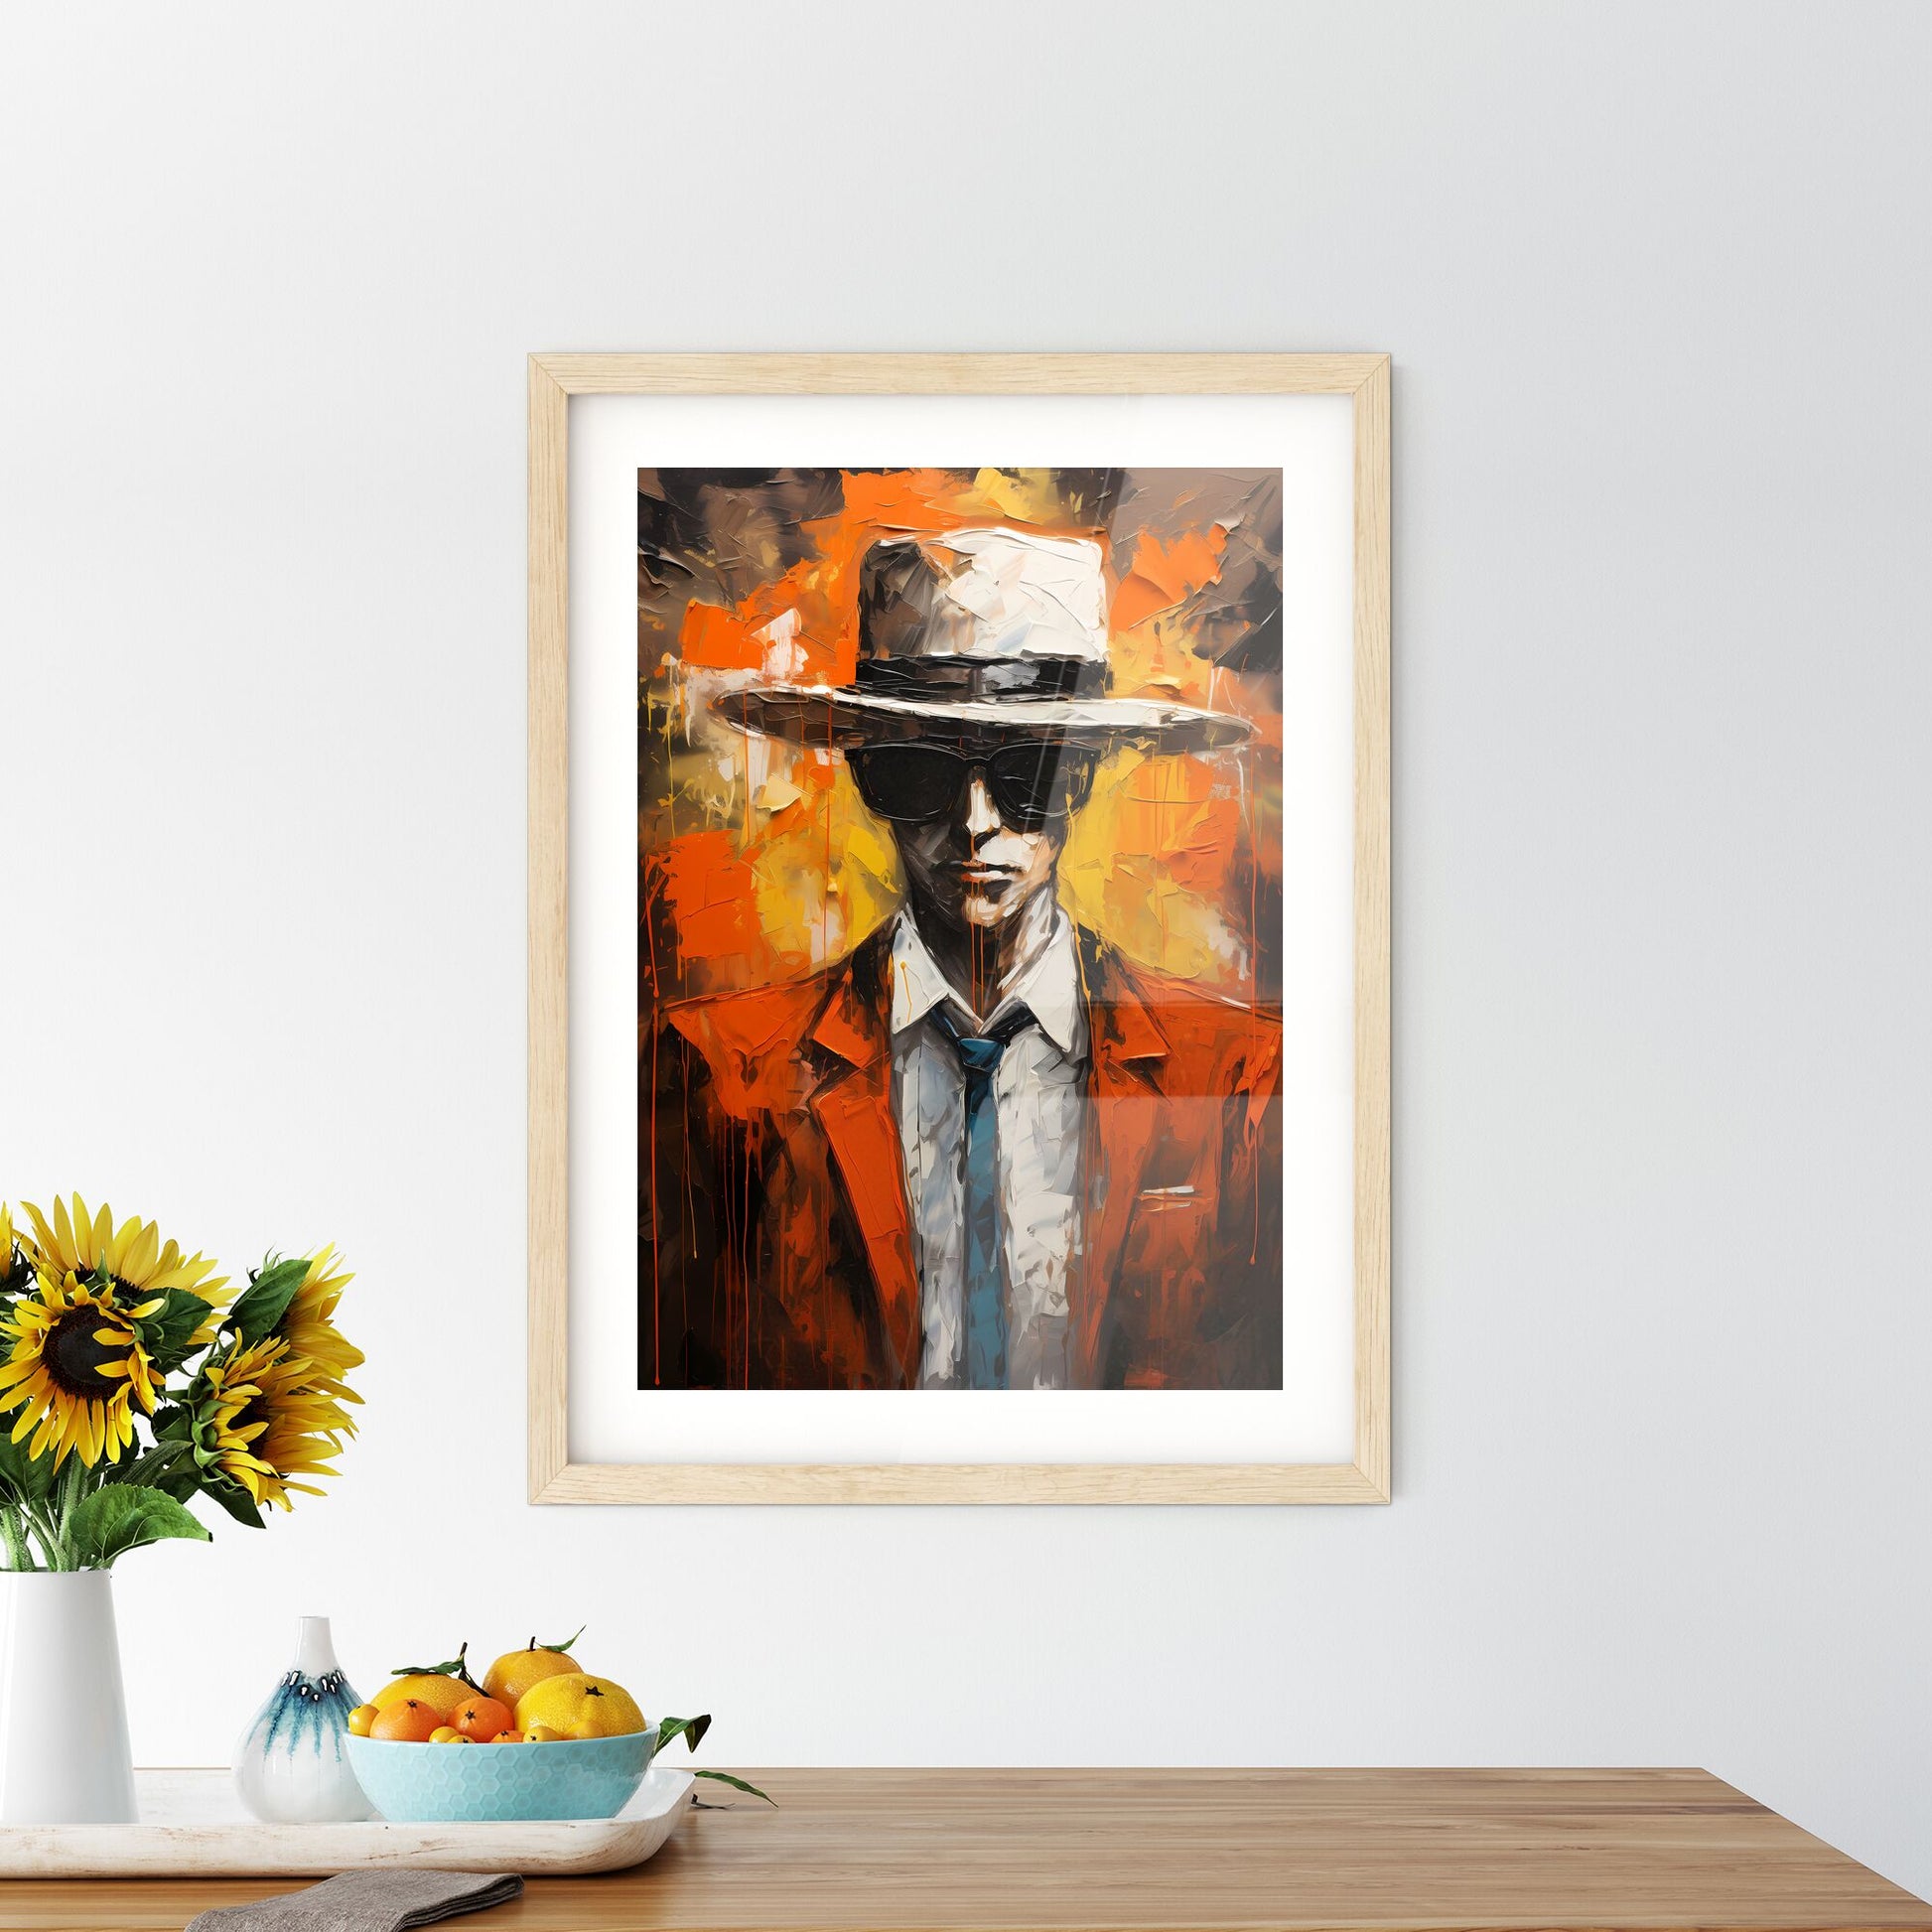 The Invisible Man - A Painting Of A Man Wearing A Hat And Sunglasses Default Title